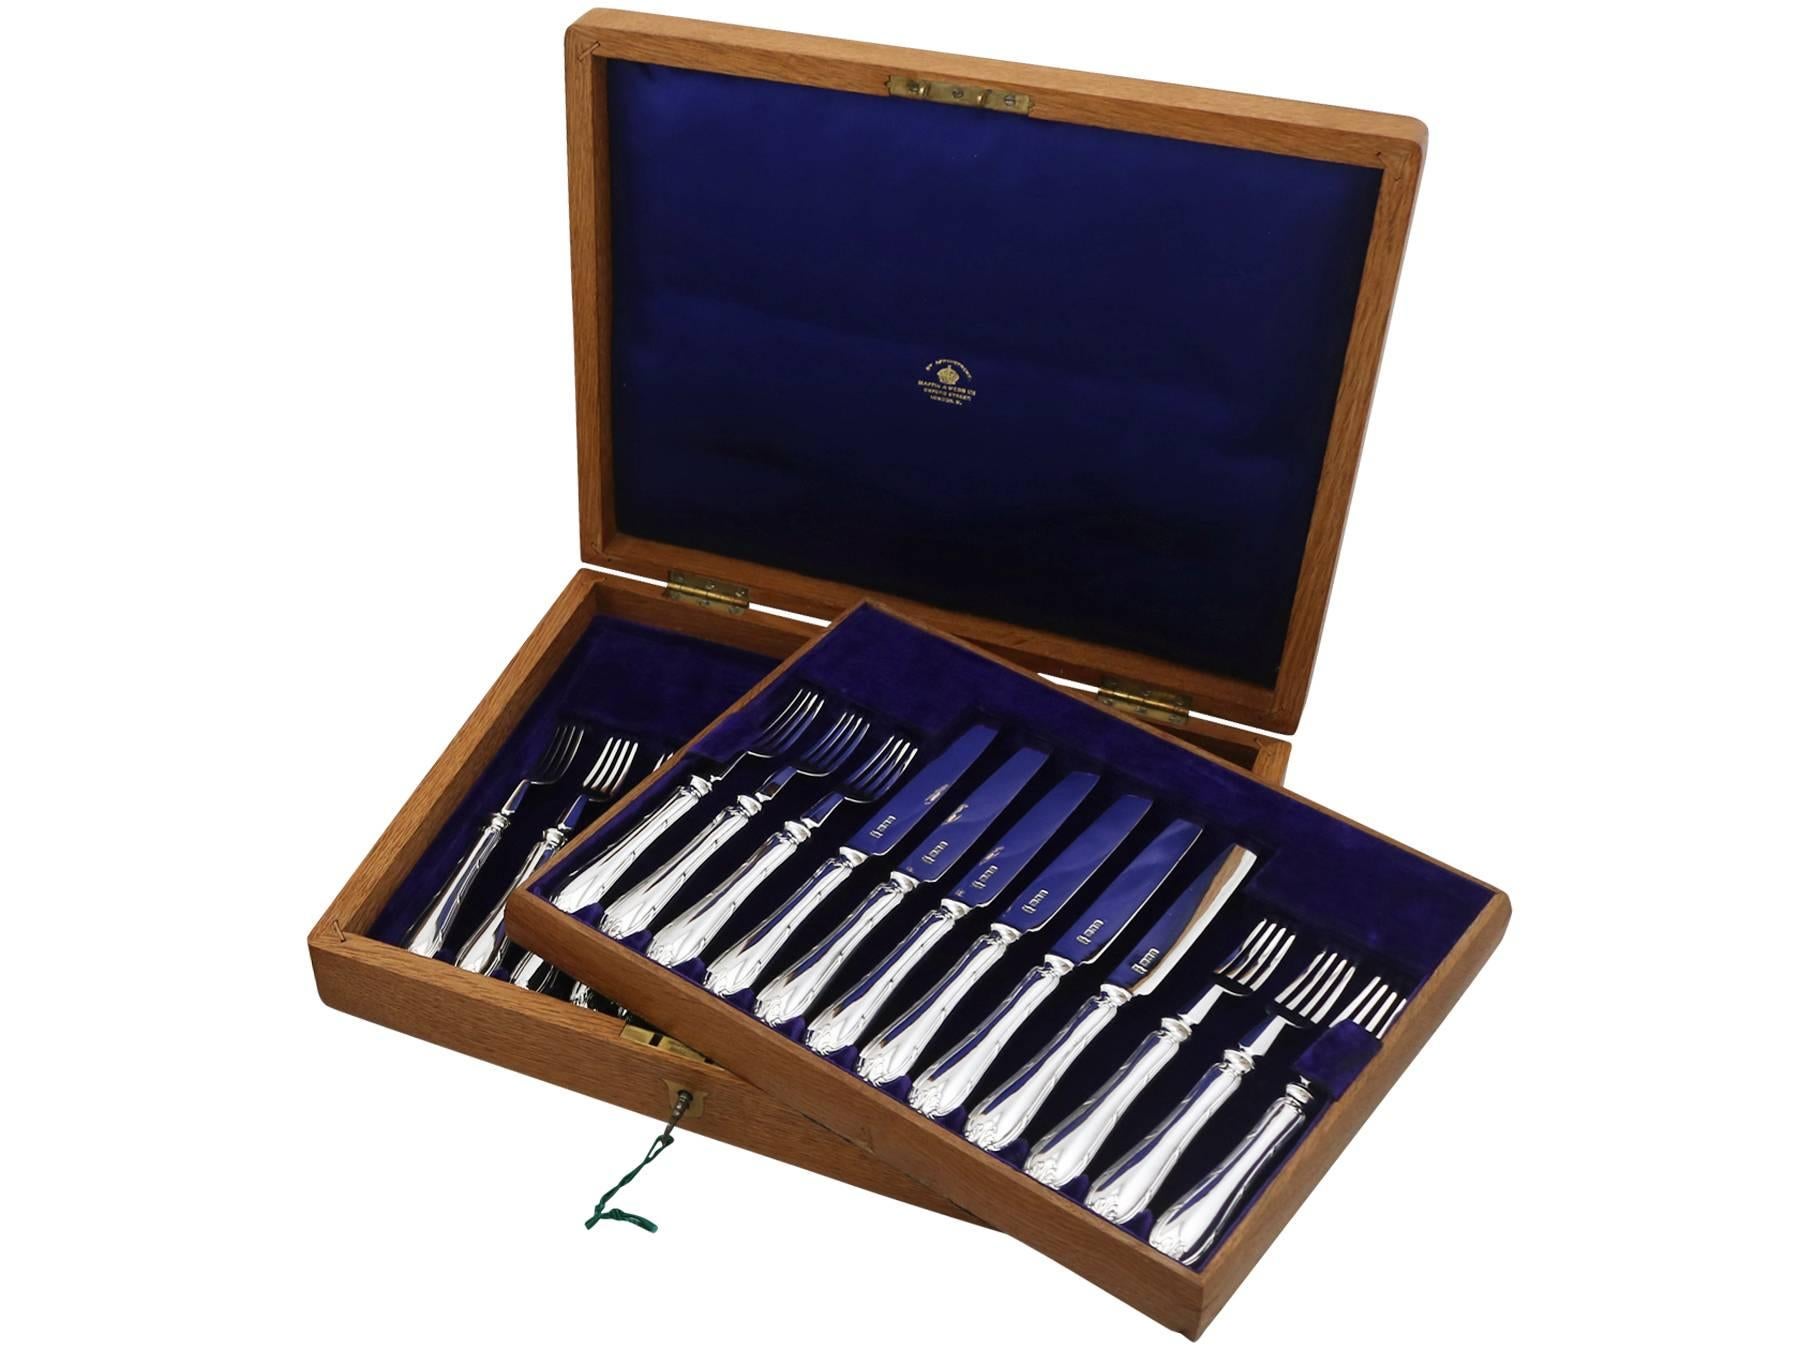 An exceptional, fine and impressive, comprehensive antique George V English sterling silver fish and dessert service made by Mappin & Webb Ltd; part of our silverware collection.

This exceptional antique George V sterling silver flatware service